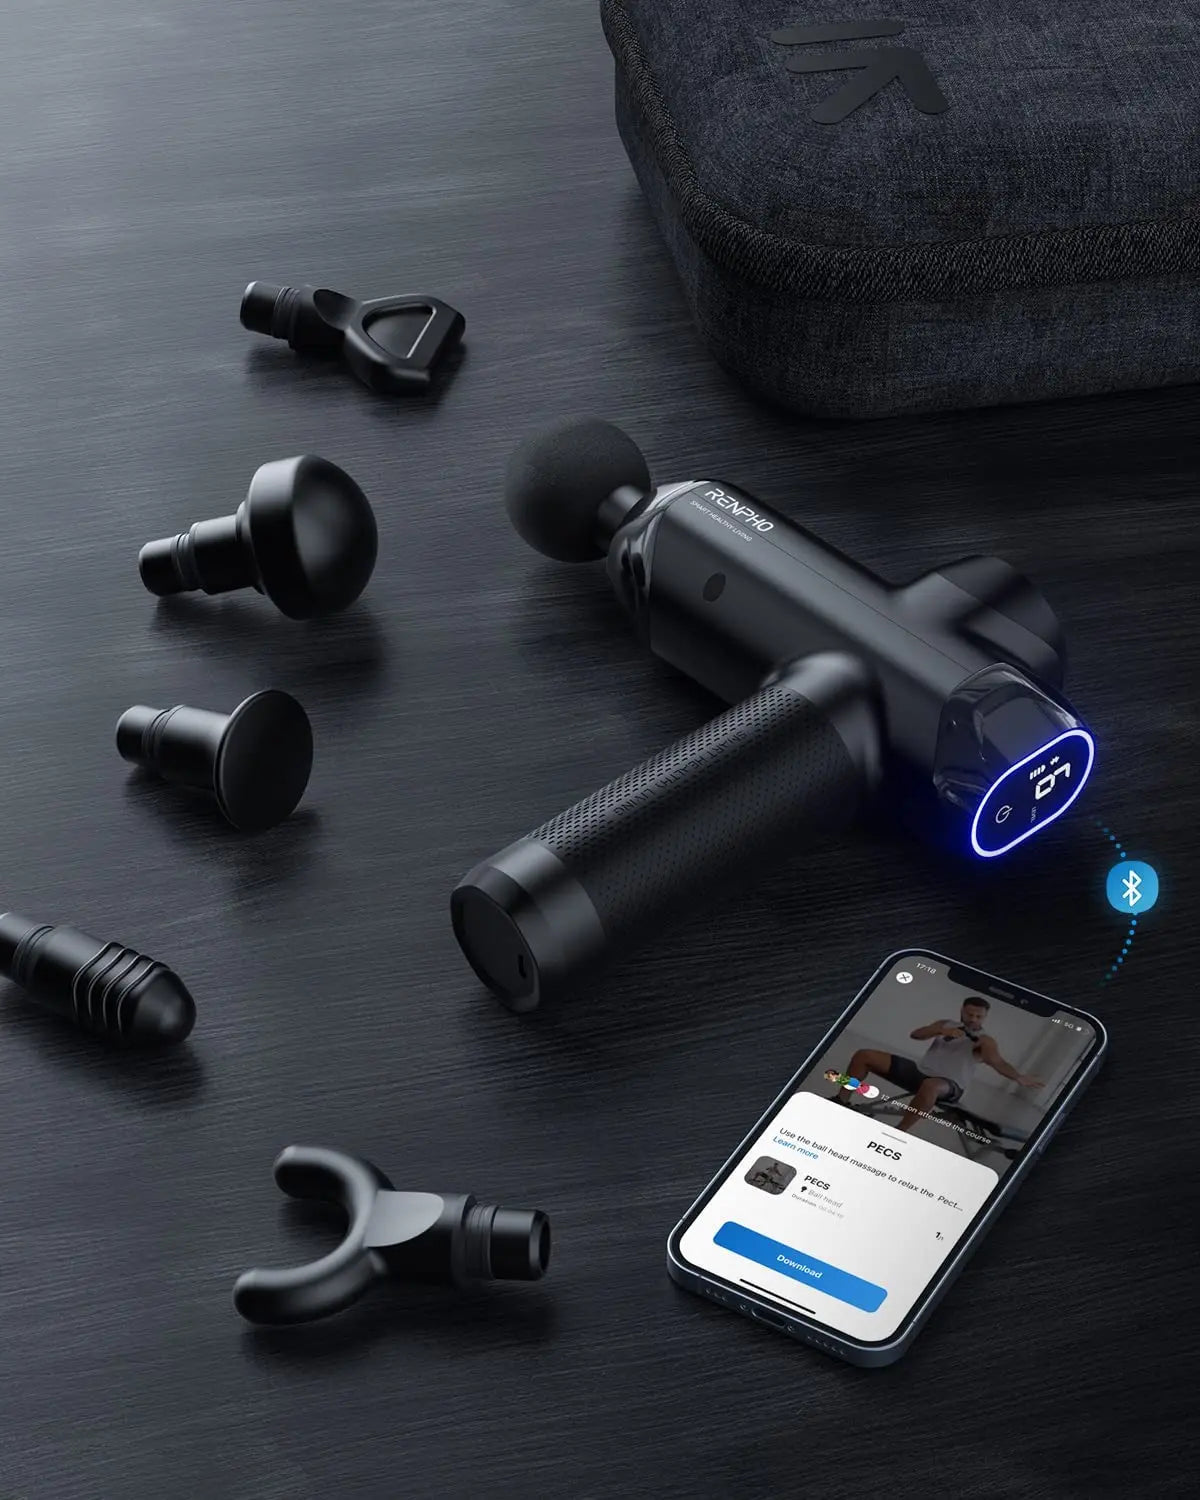 A black RENPHO Power Massage Gun with textured grip is on a dark surface surrounded by several interchangeable heads of varying shapes. A smartphone nearby displays a fitness app focused on workout recovery, and a zippered carrying case is in the background. The massage gun's controls are illuminated with blue light.